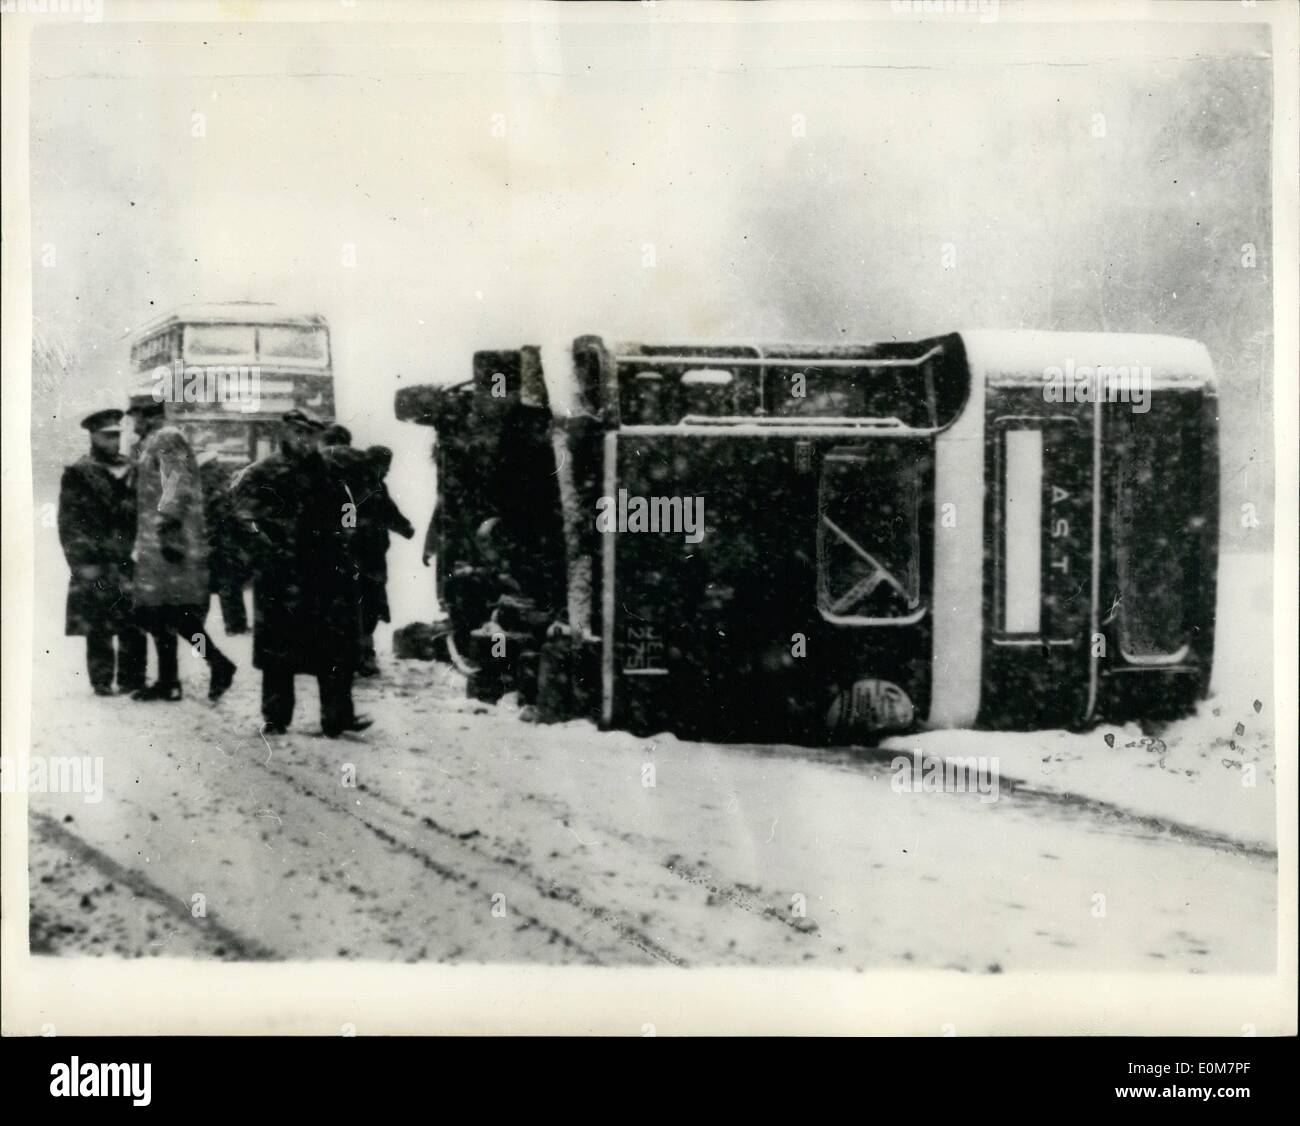 Jan. 01, 1954 - Snow and ice in 31 counties. Many escape as bus overturns near Southampton.: Roads in thirty-one counties of England and Wales were affected by snow or ice today in the cold spell which spread throughout the country. Road traffic was disrupted and trains delayed - and there were several accidents on treacherous roads. Forty five men on their way to an aircraft factory at Hursley, Hampshire, had lucky escapes when the works bus got out of control on a snowbound hill on the main Southampton - Winchester road. The bus toppled on to its side Stock Photo